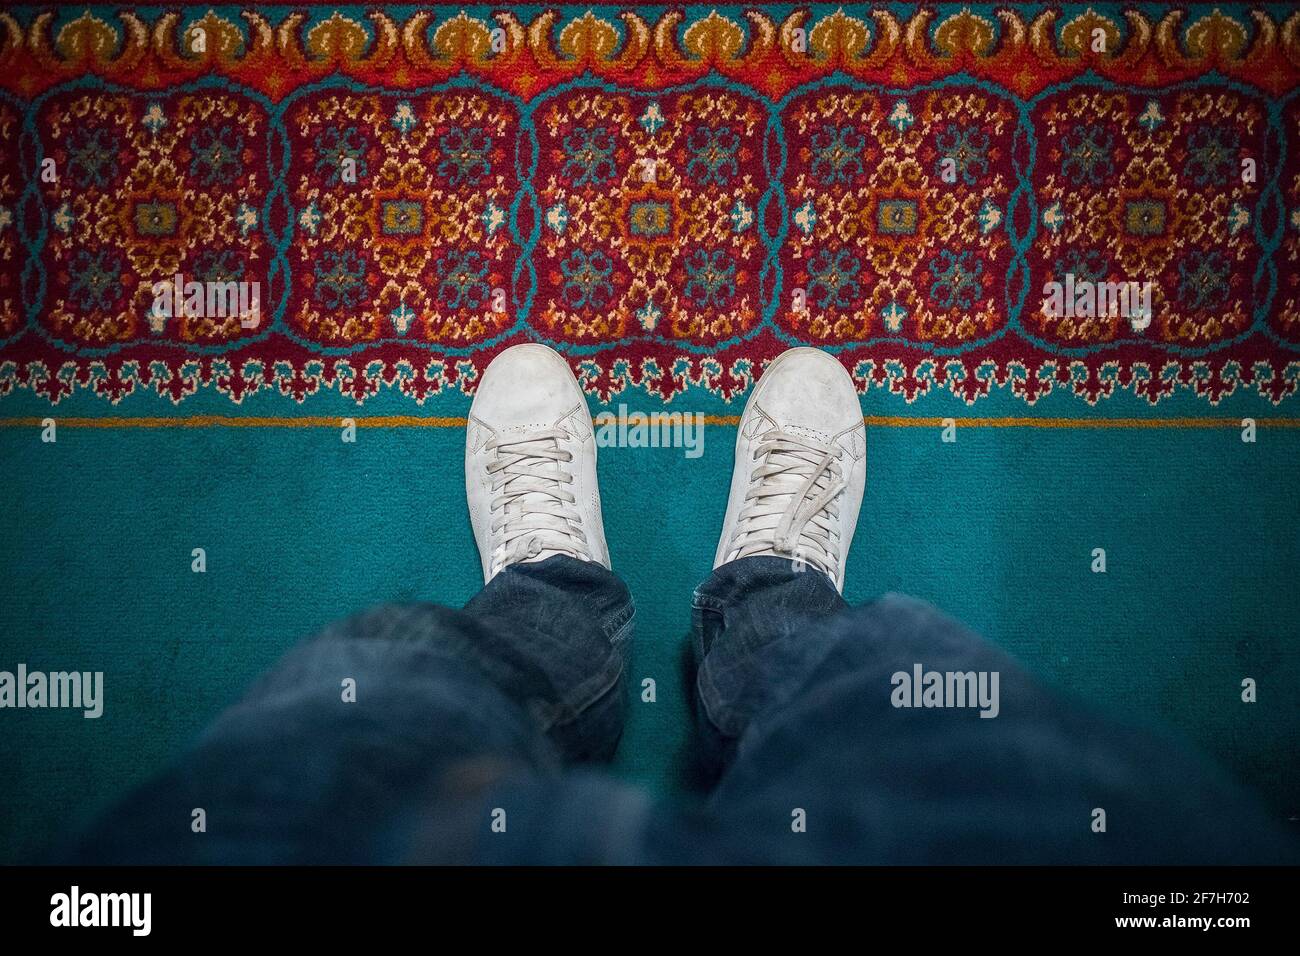 Foot of a man standing on a hotel floor mat or rug, wearing jeans and white sneakers. View from above. Stock Photo